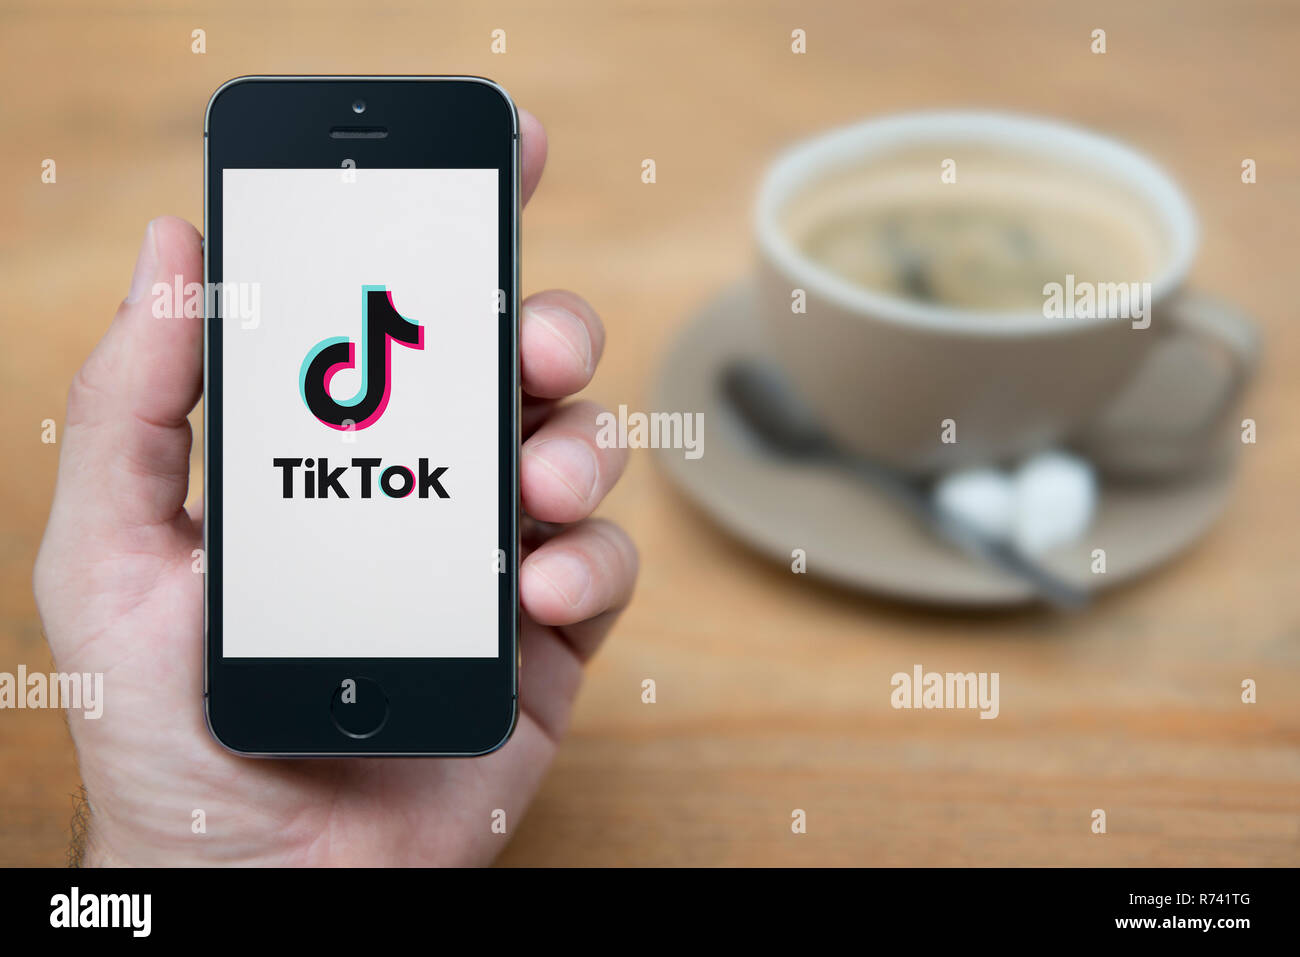 A man looks at his iPhone which displays the TikTok logo (Editorial use only). Stock Photo